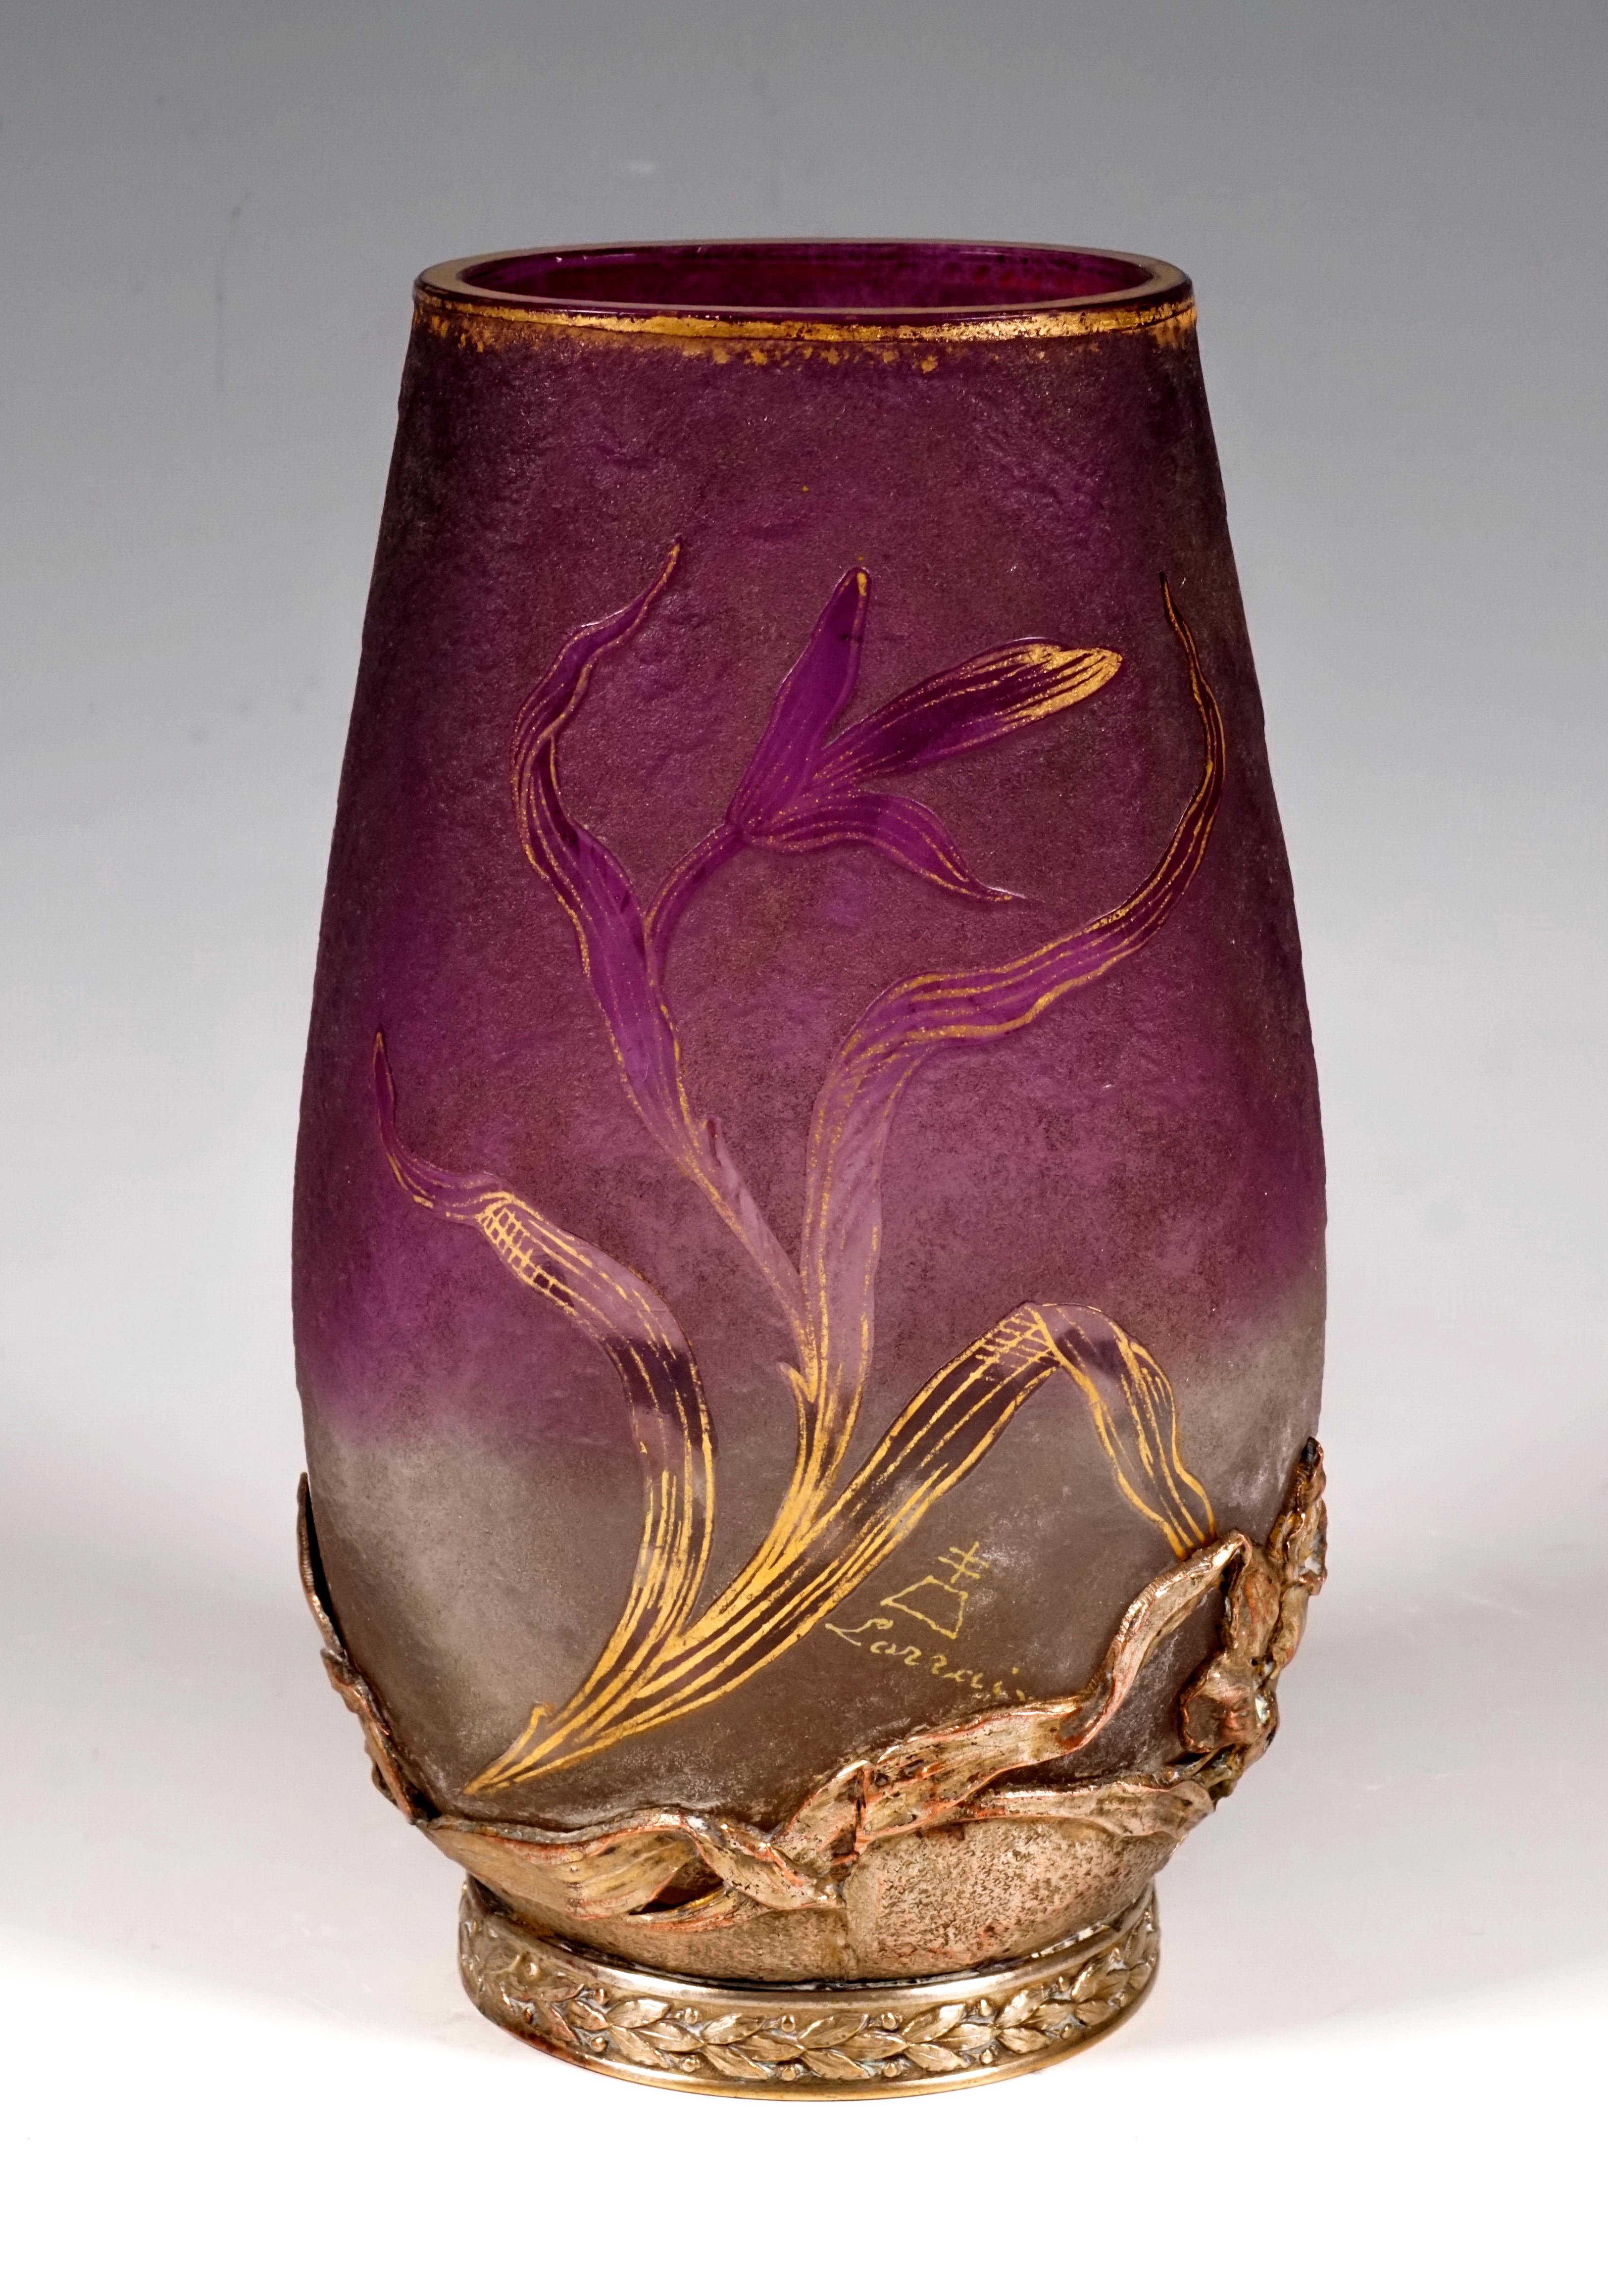 Vase in oval, bulbous shape, tapering straight towards the top, cut, gilded mouth rim, colorless glass with violet meltings in the upper area, decor of iris flowers with stem and leaves in high cut and provided with gold heightening, satined surface